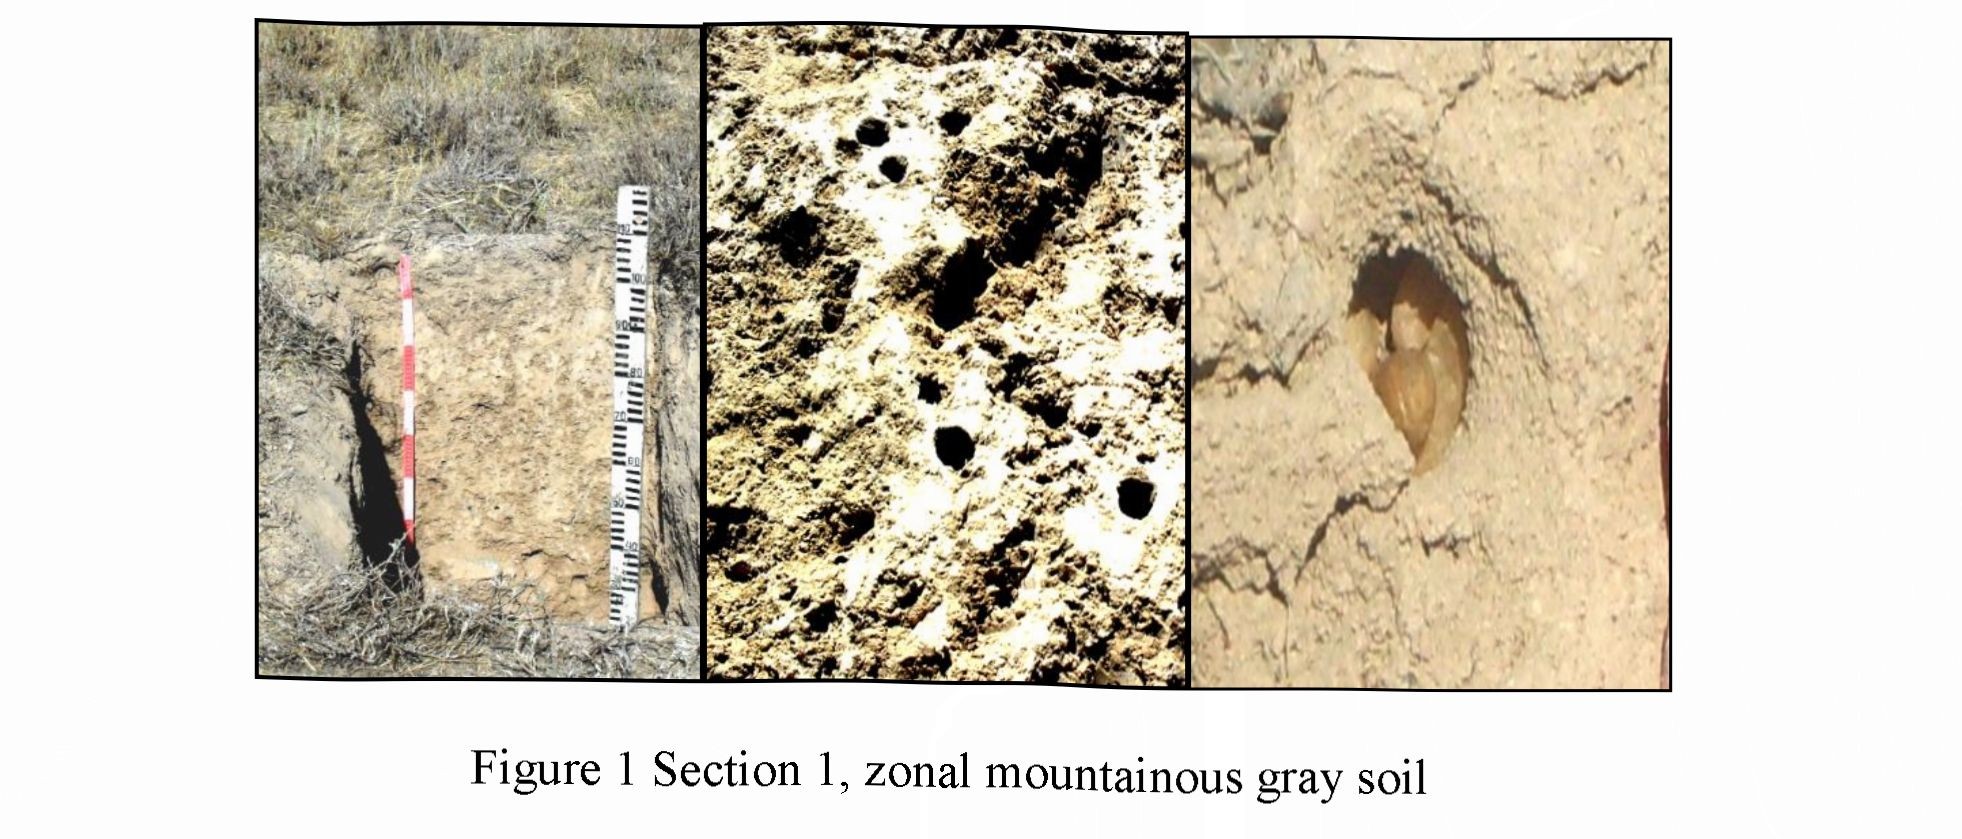 The primary processes of soil formation in technogenically disturbed terrains of kokzhon phosphorite deposit